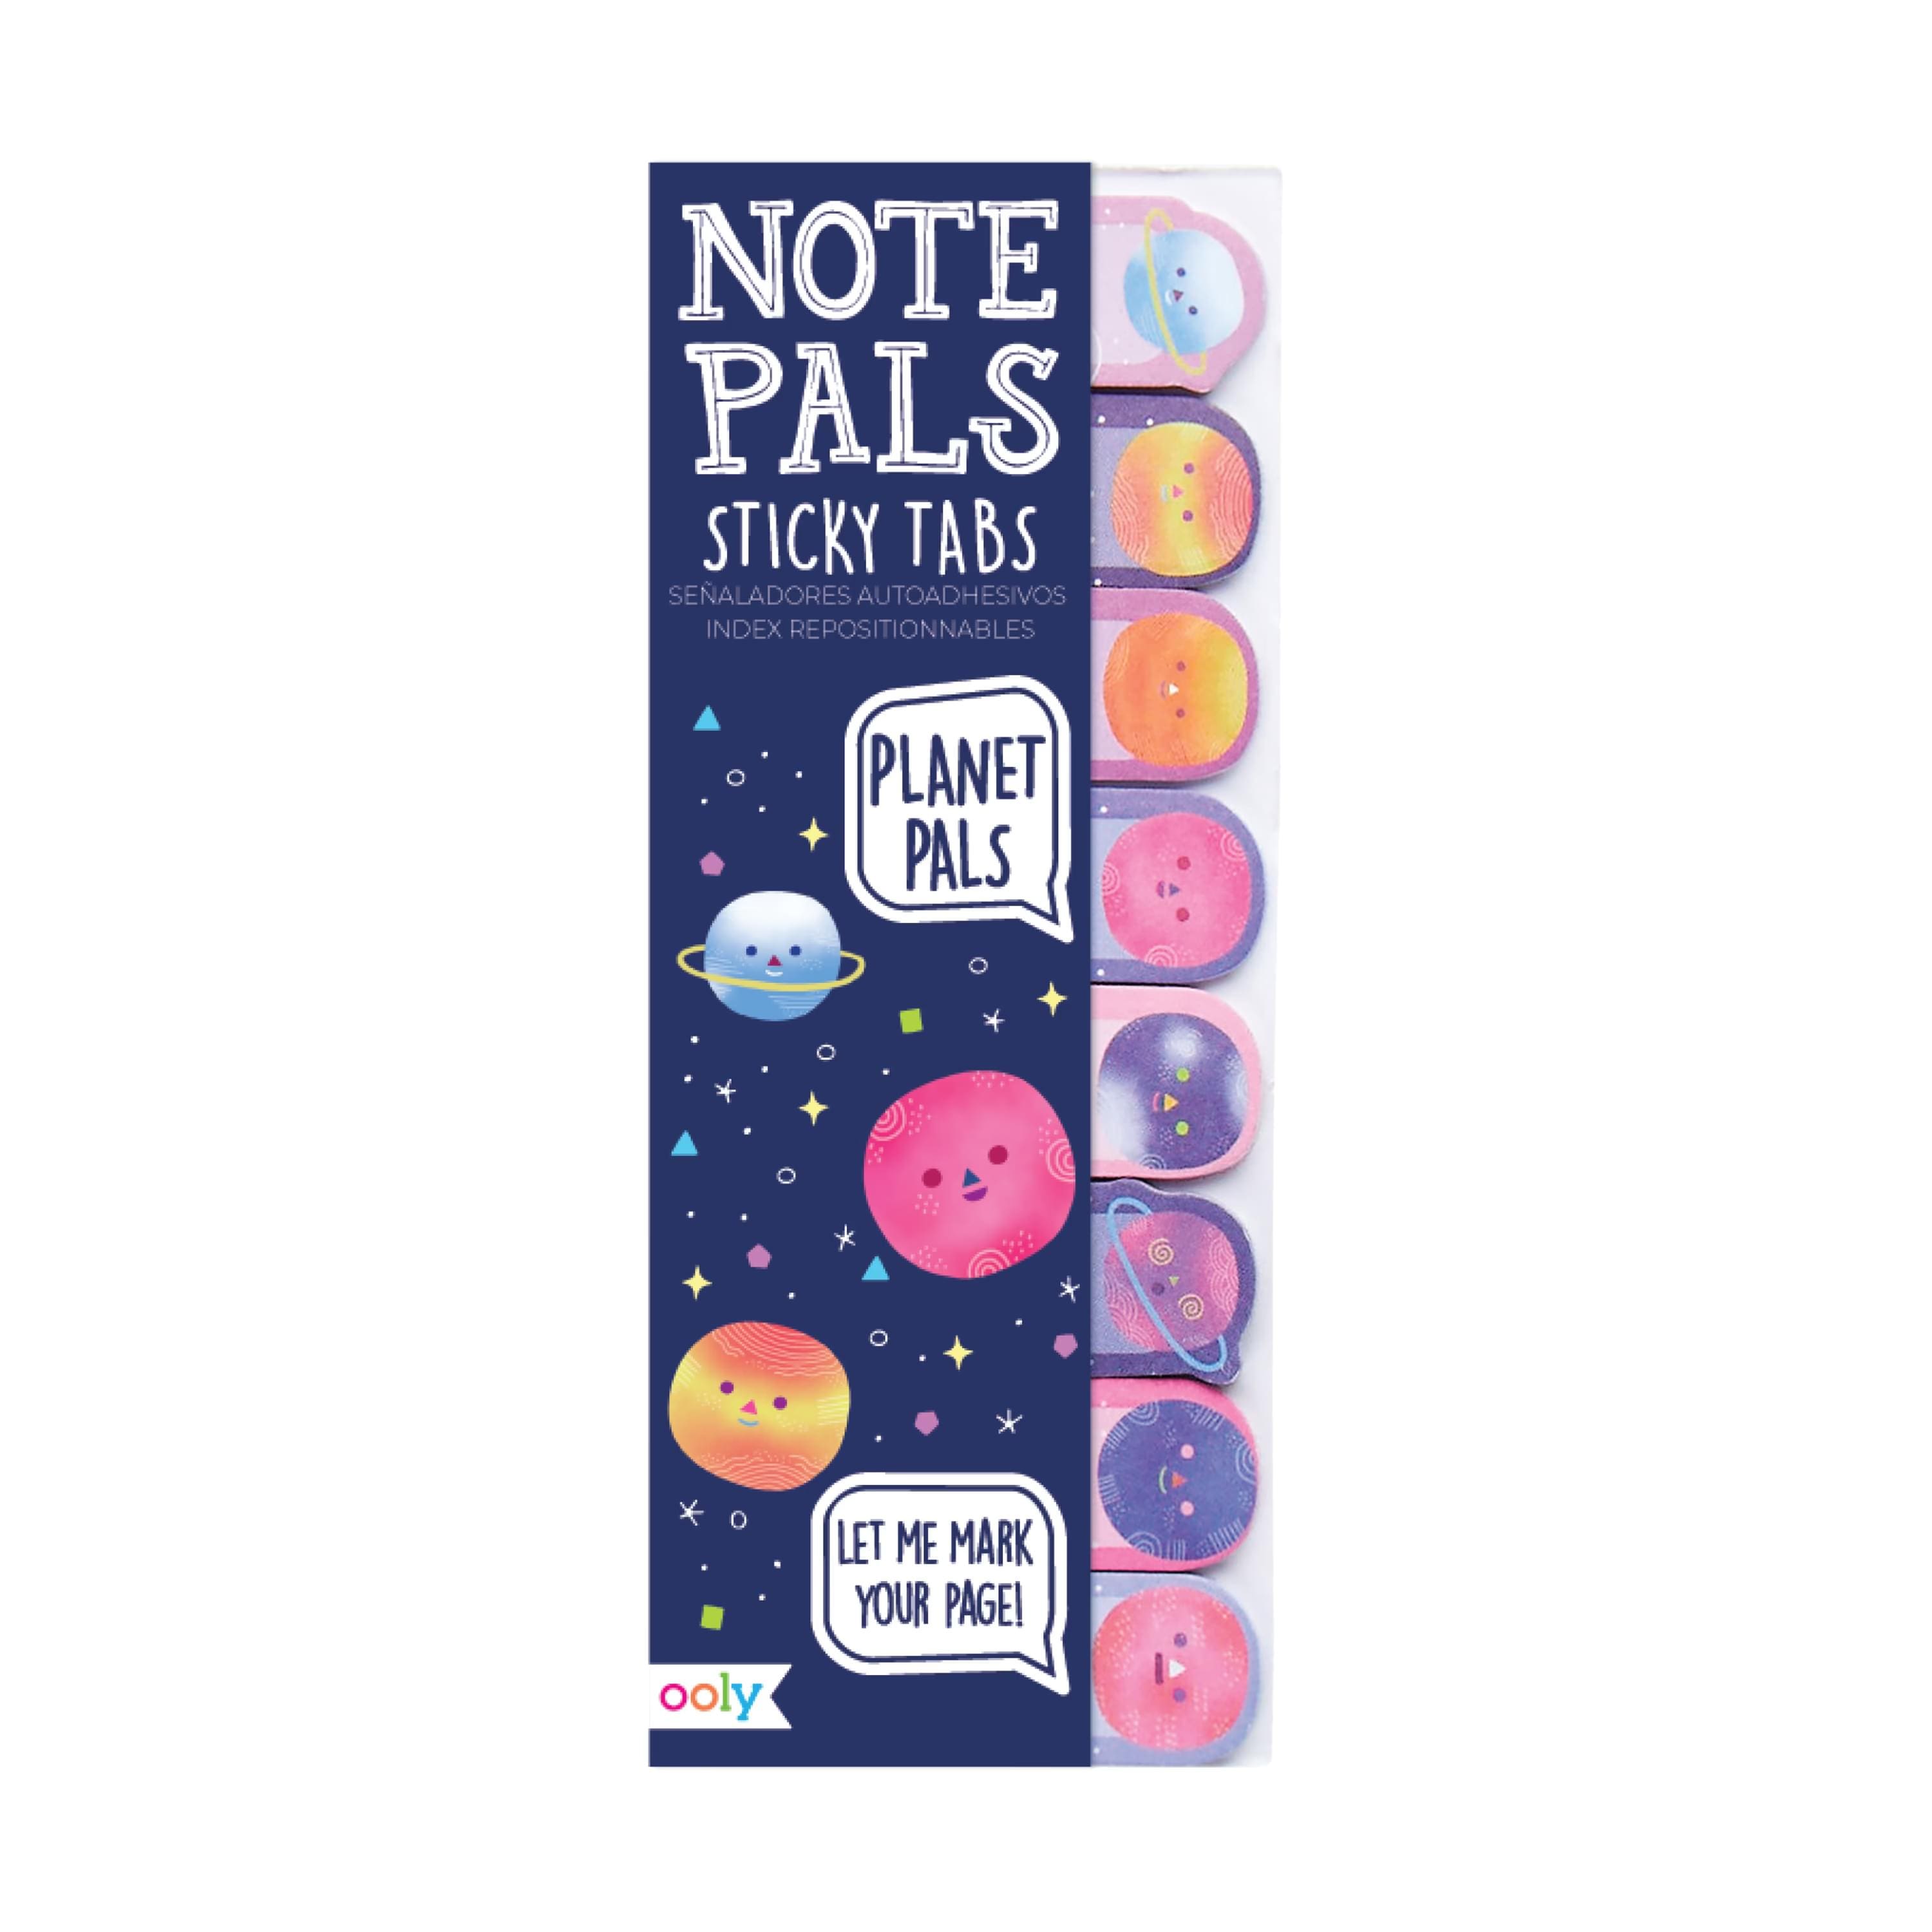 OOLY Note Pals Planet Pals Sticky Tabs